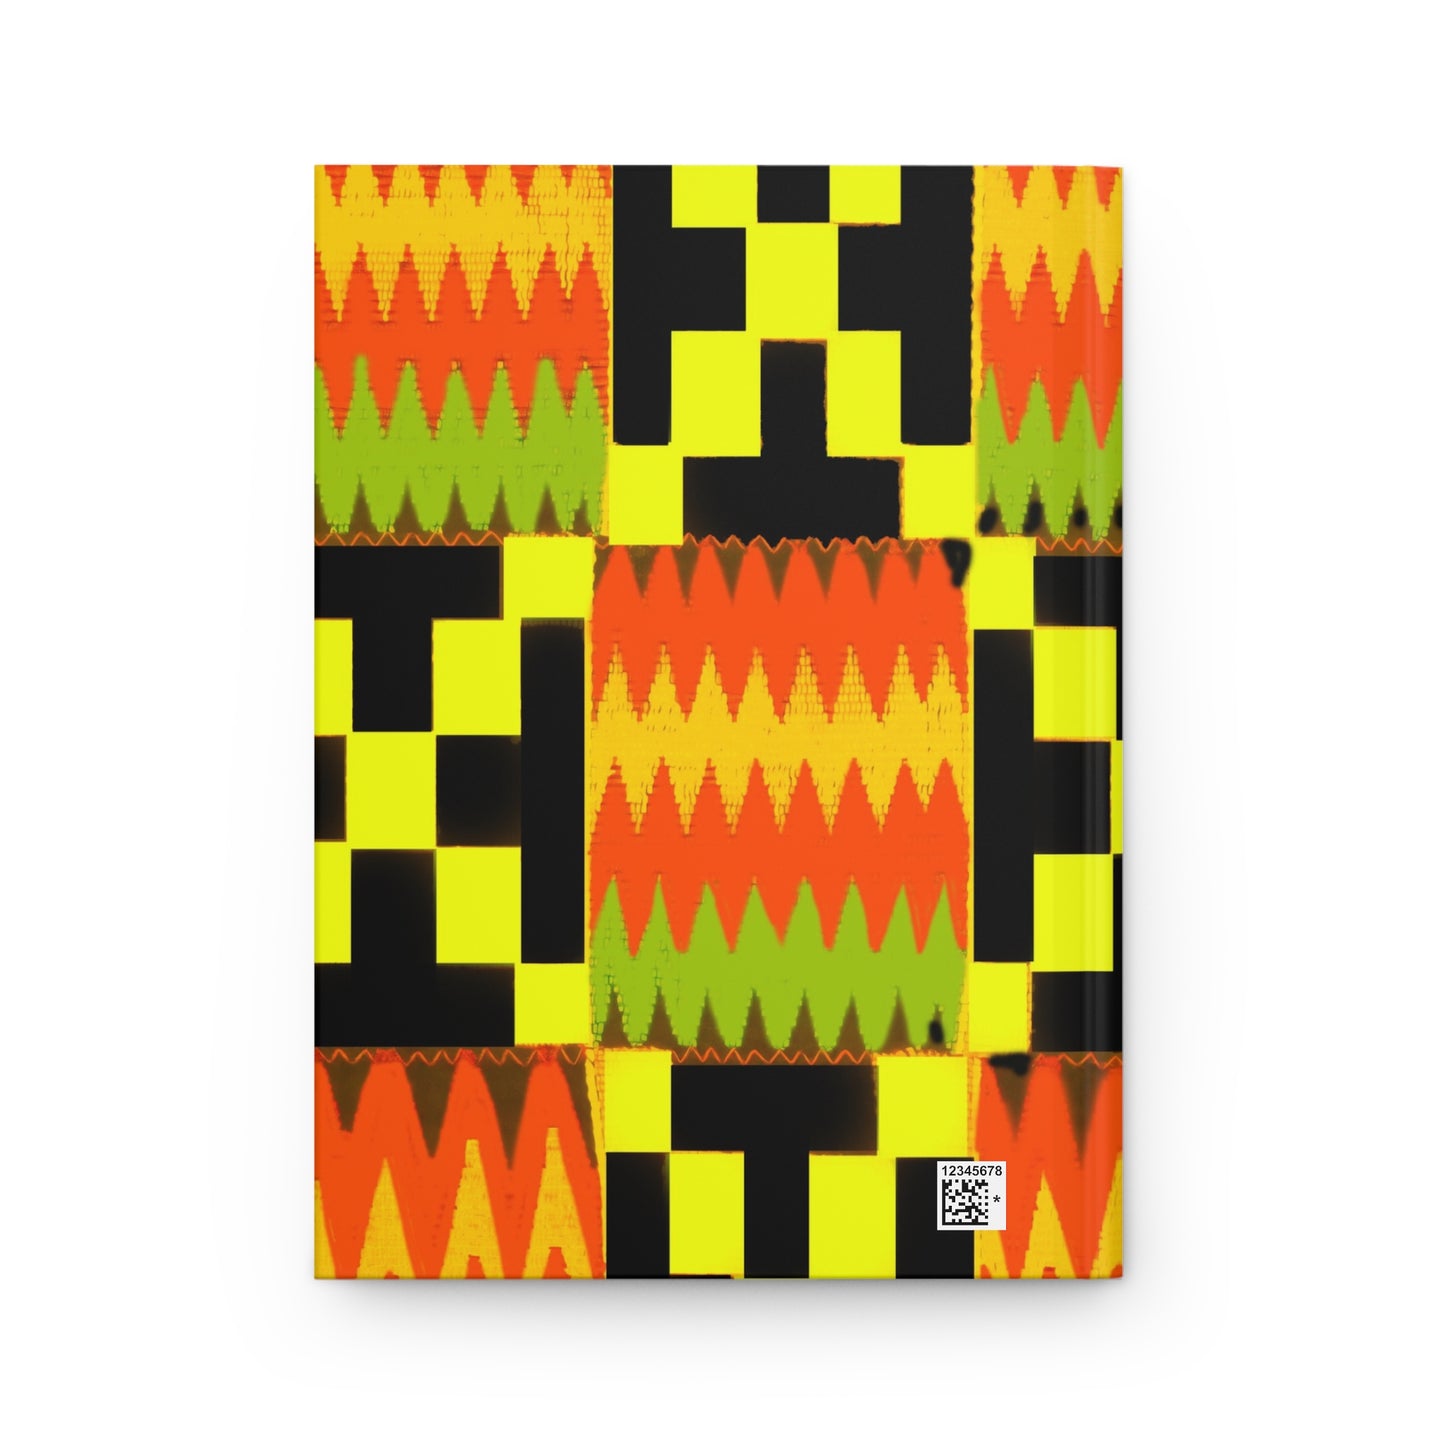 Vibrant Kente Designs: Hardcover Journal for Bold Expression